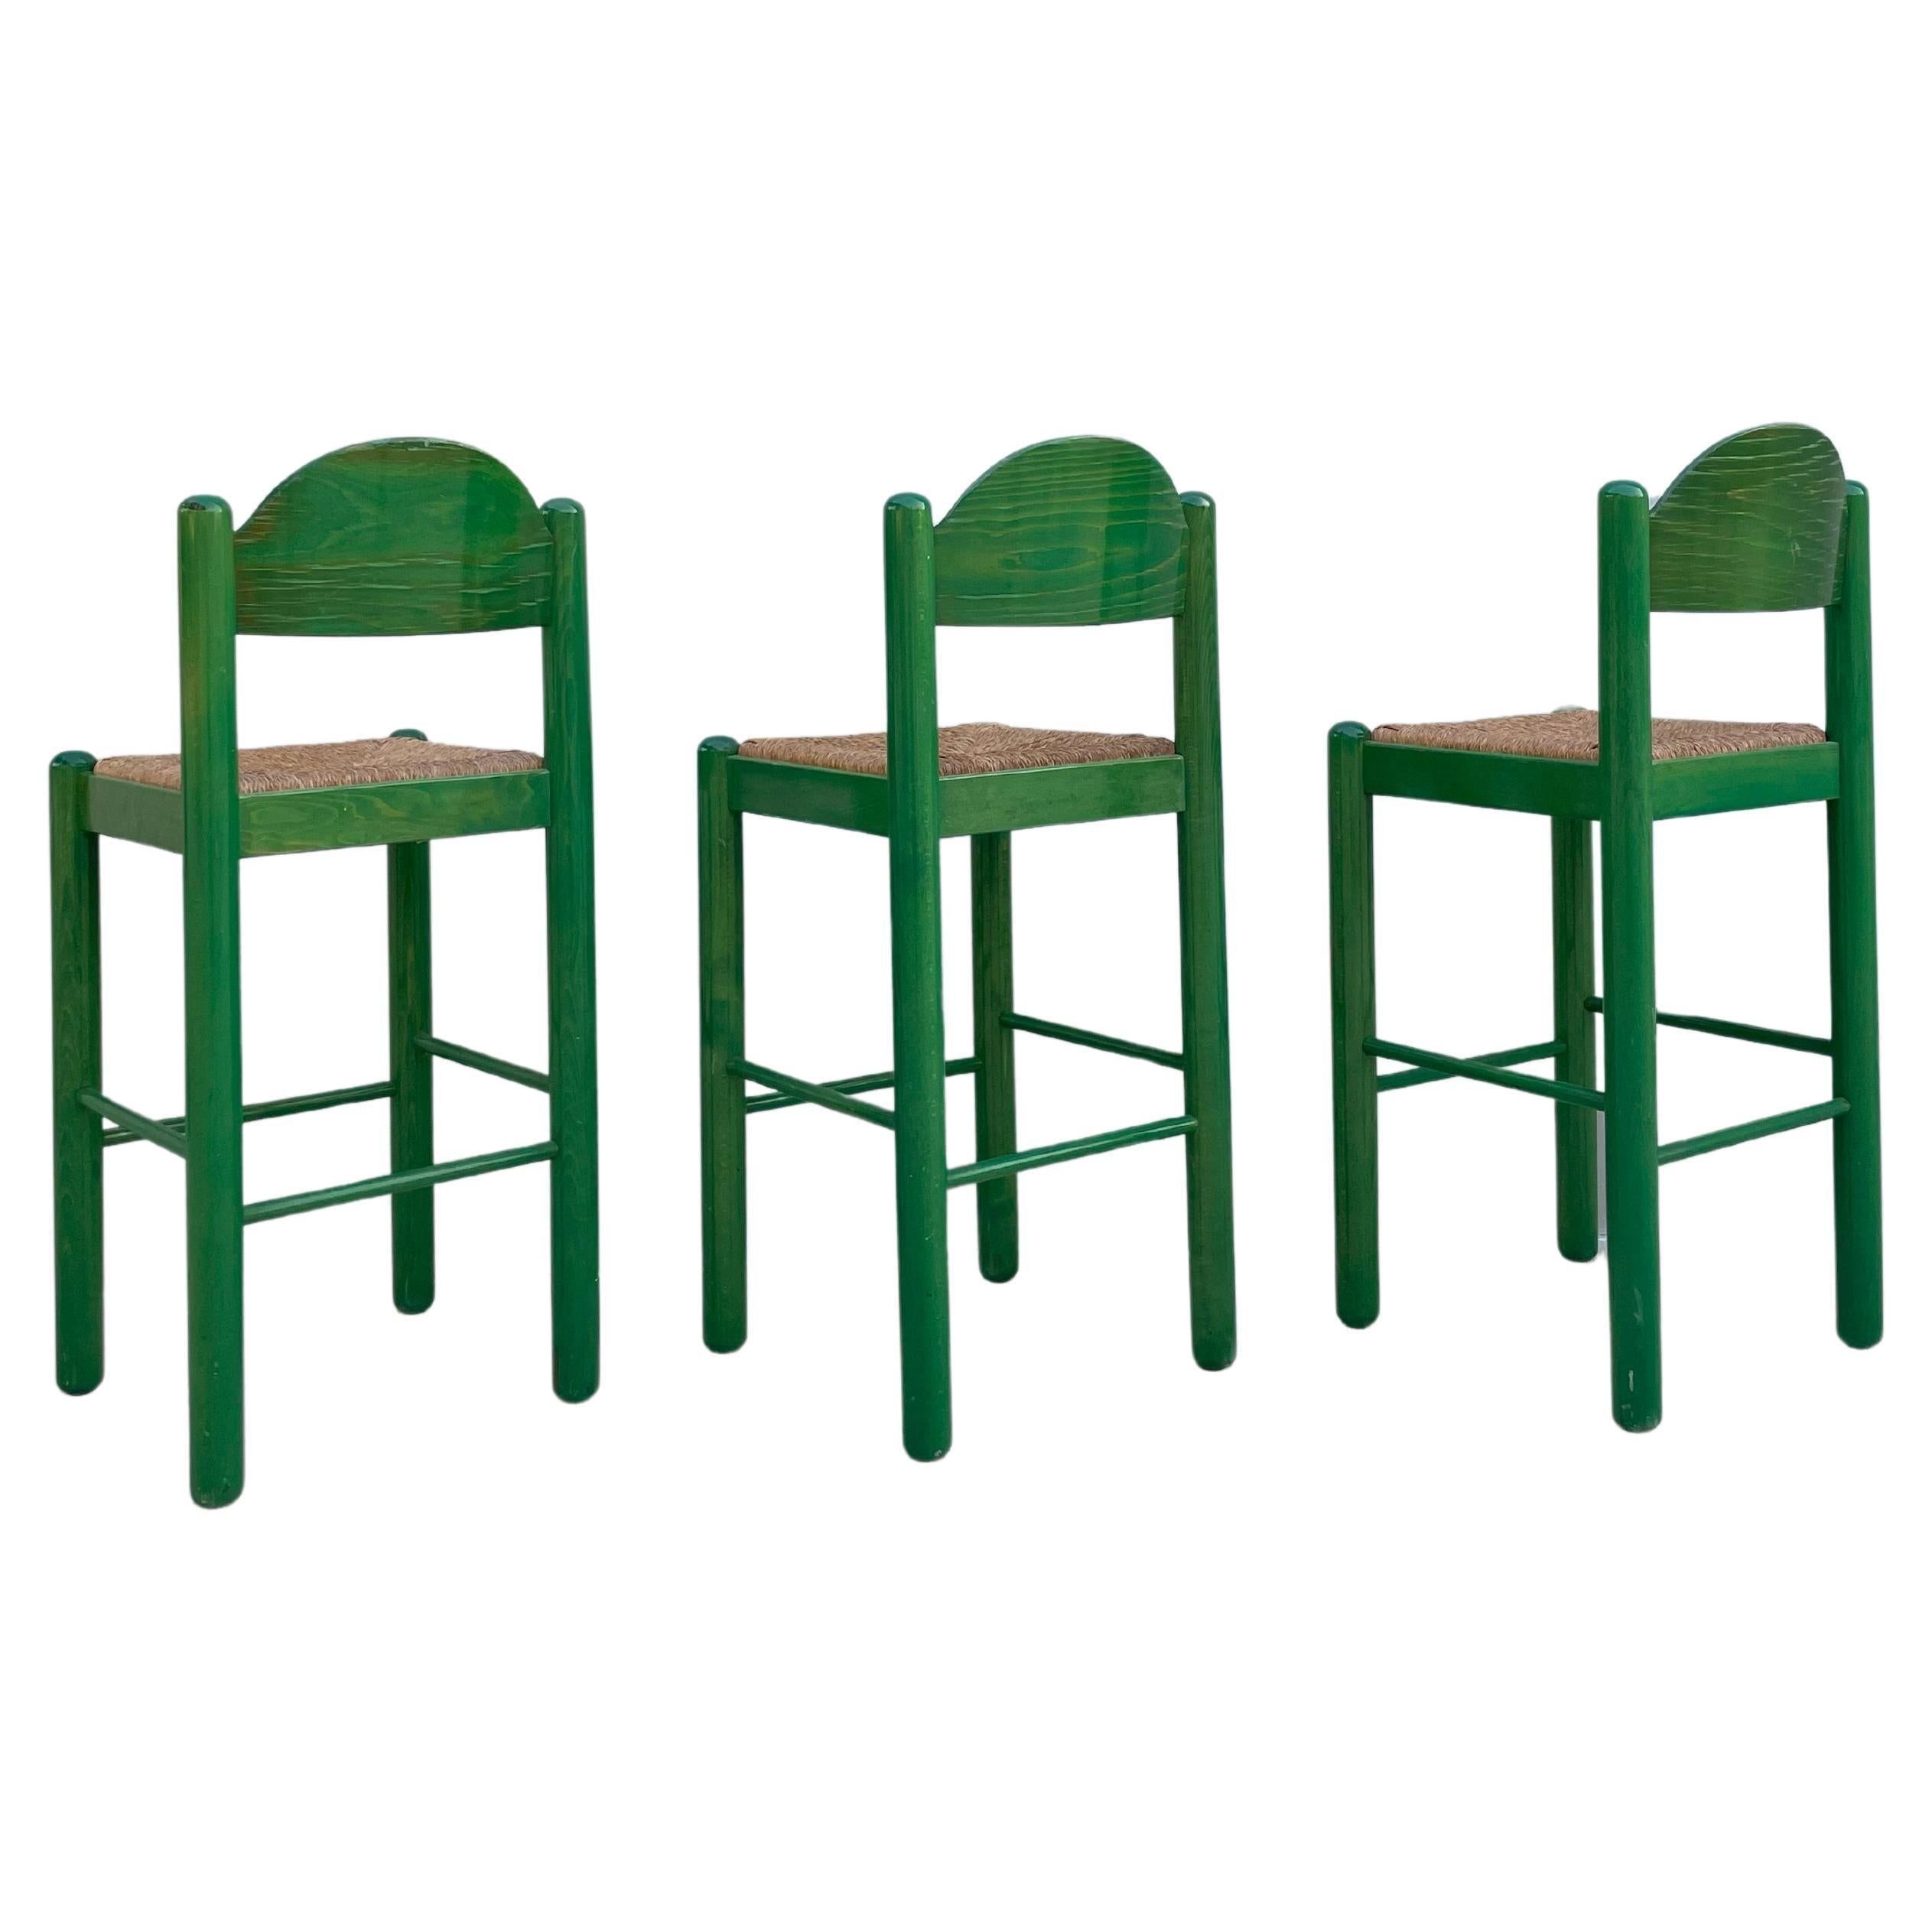 Set of 3 vintage Hank Lowenstein Padova Bar Stools. Original rush seats and green varnish. Rush seating is in excellent condition; some wear and fading to the varnish in different areas of the chairs. Lightly used, with light scratches, or minor